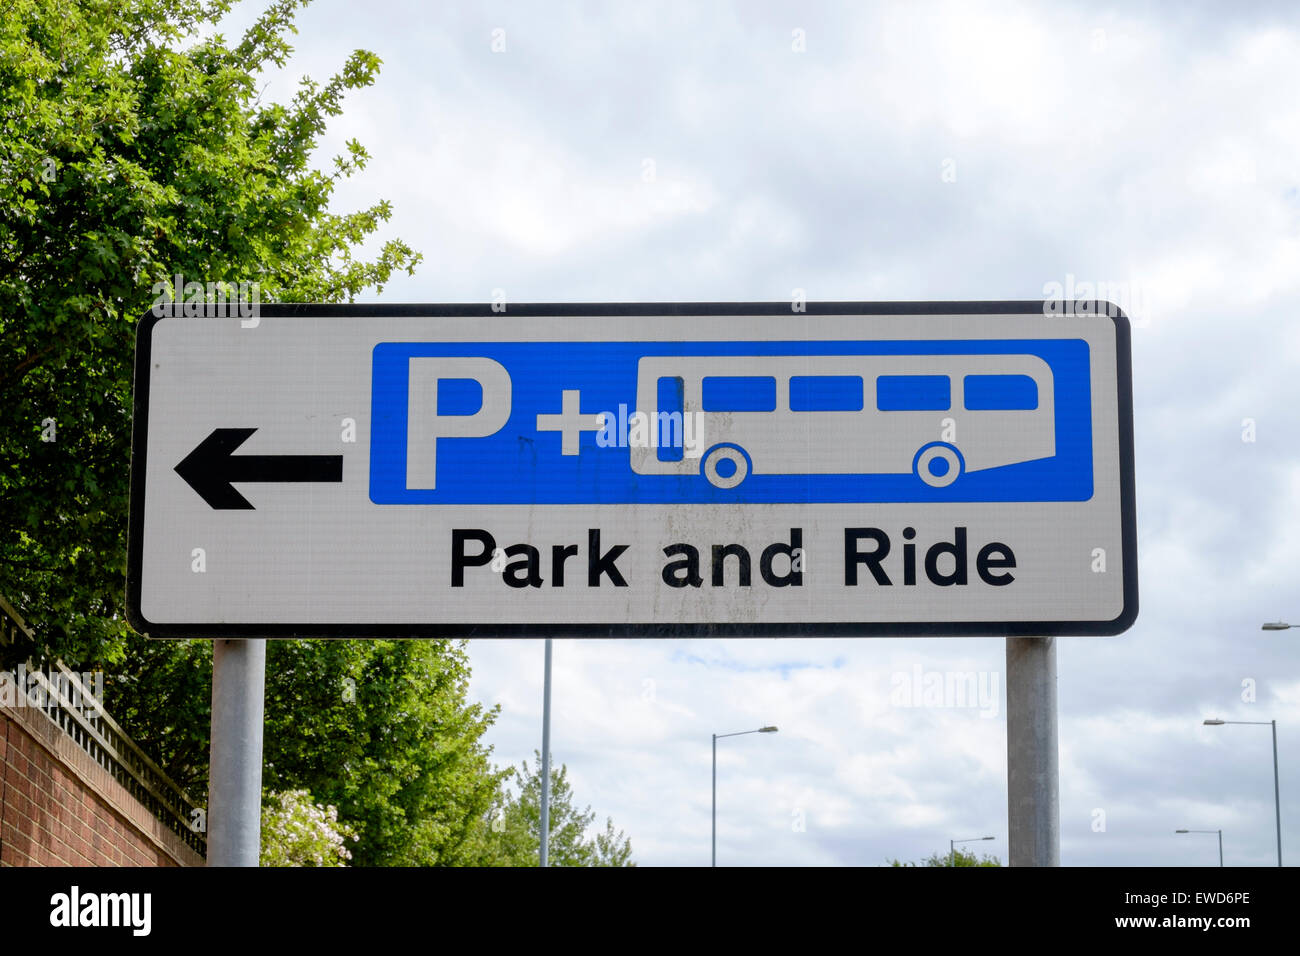 City park and ride sign with capital P indicating car parking facility and a graphic of a public transport bus UK Stock Photo